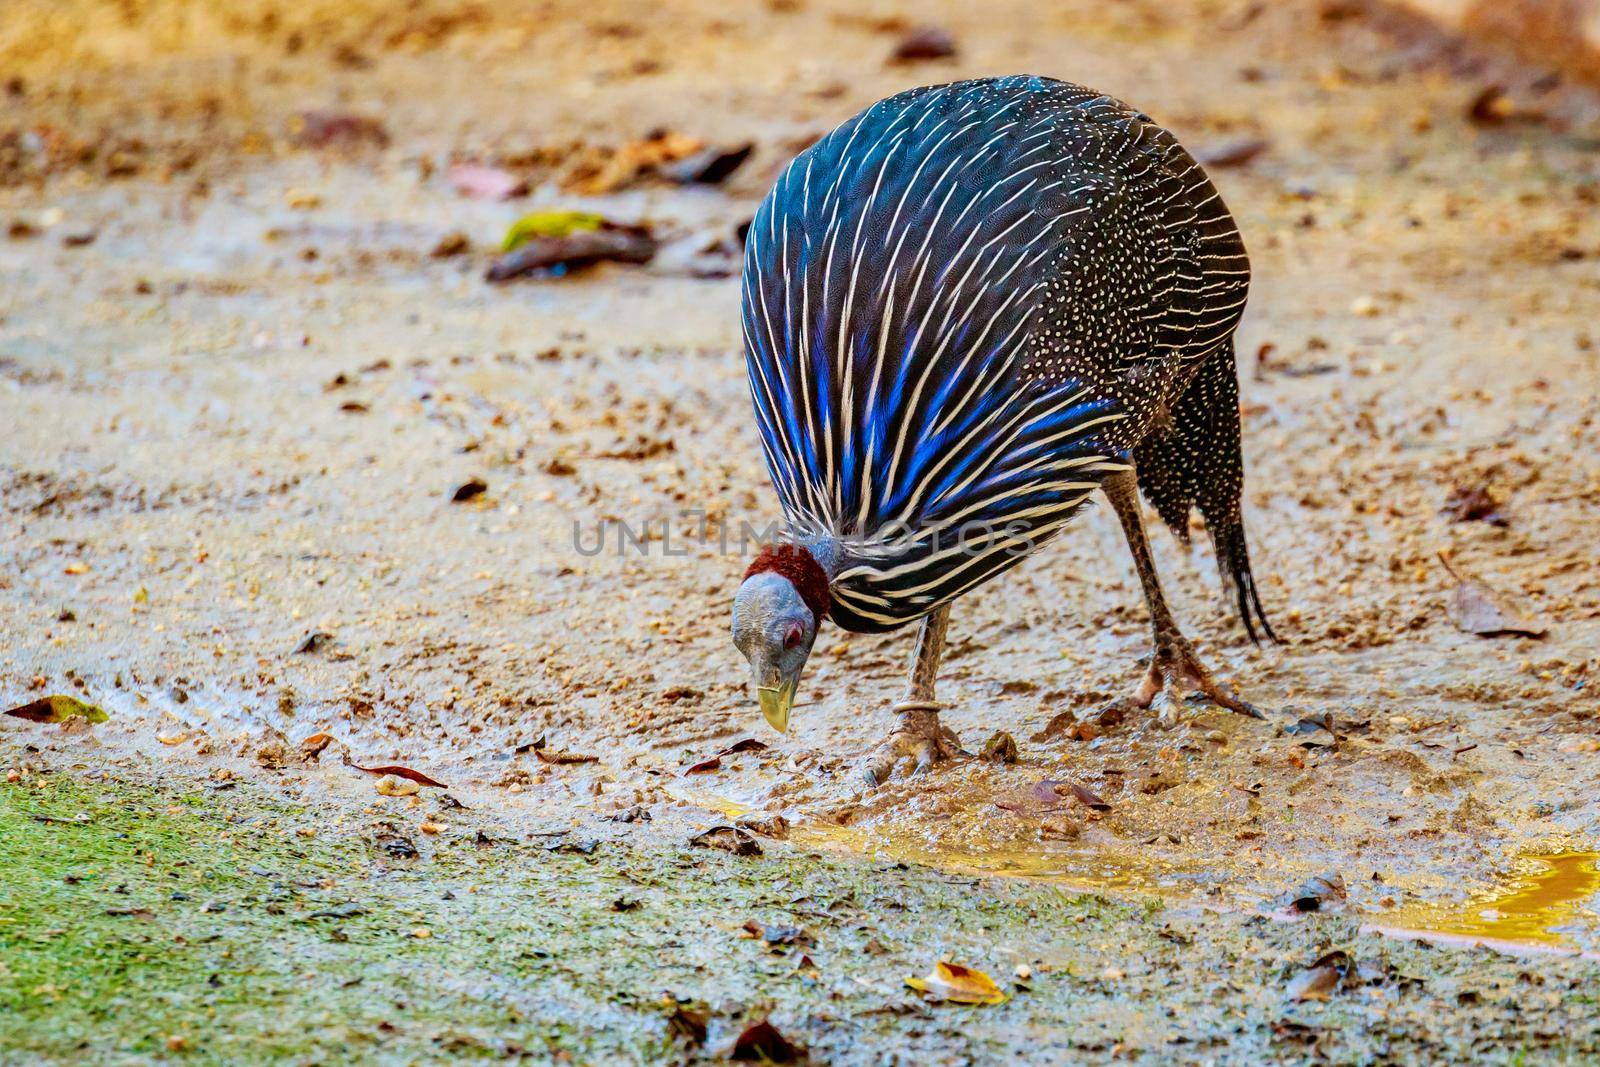 An adult Guineafowl looking for Food on the ground.